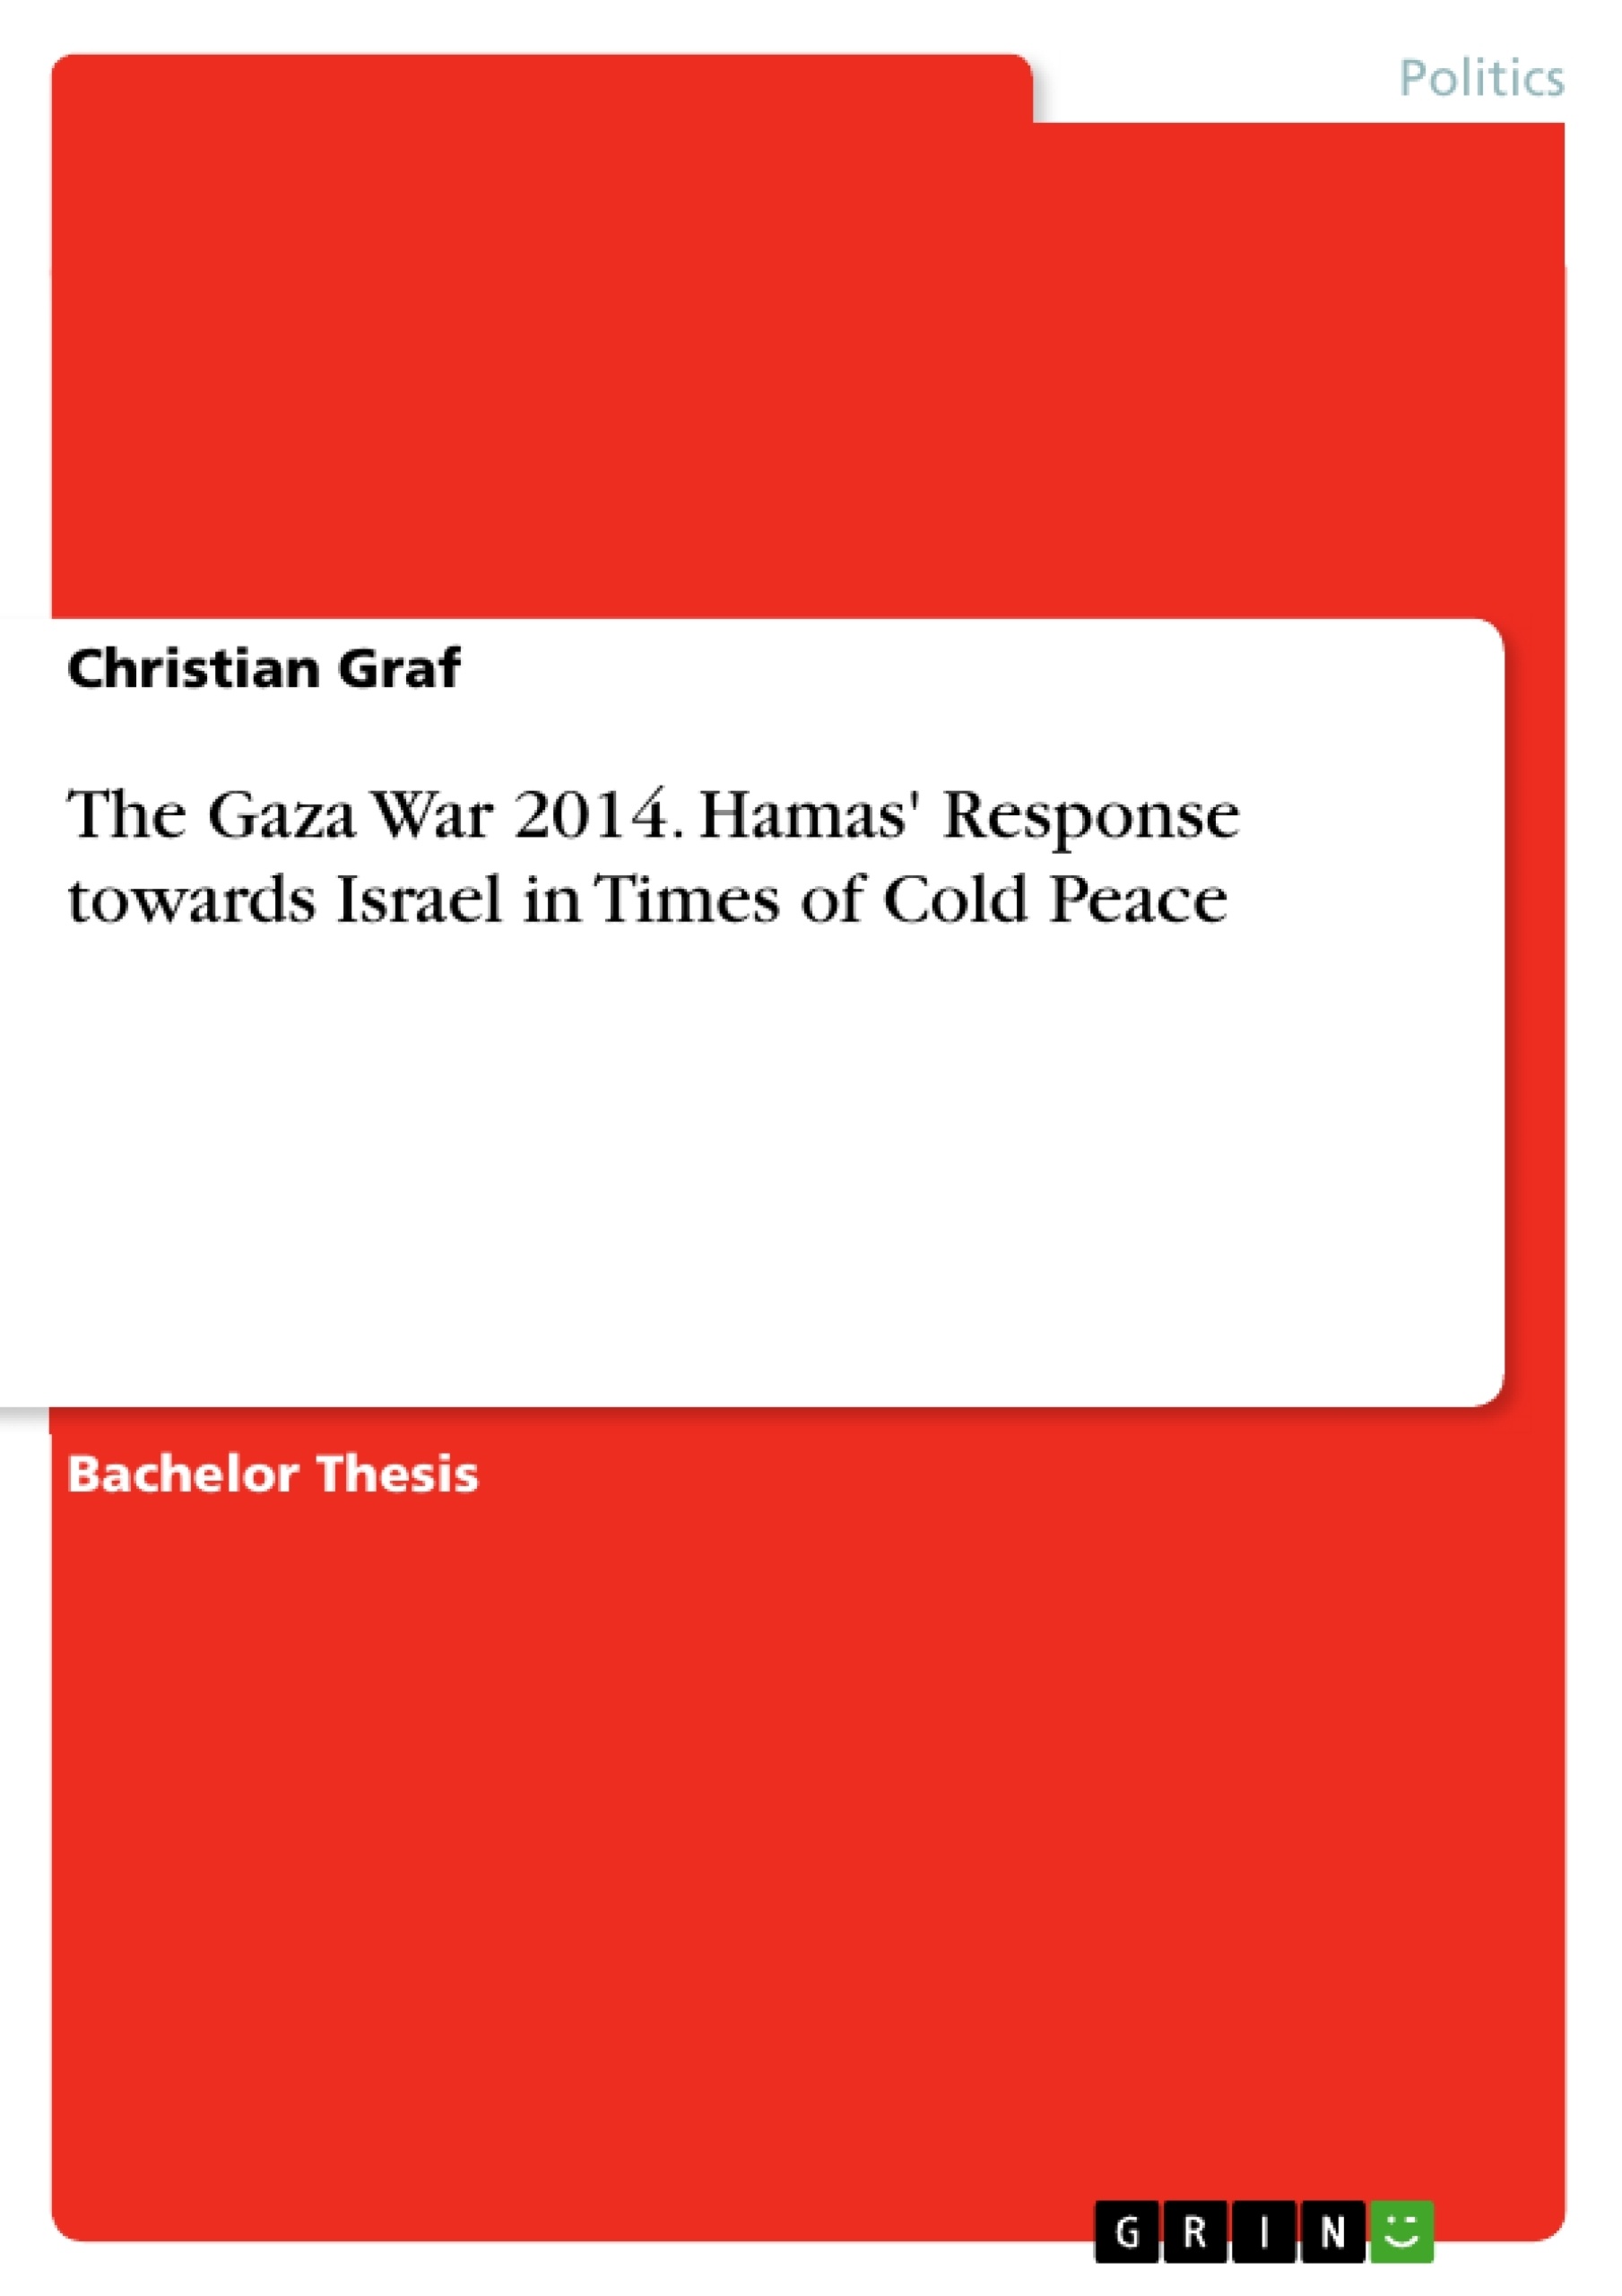 Title: The Gaza War 2014. Hamas' Response towards Israel in Times of Cold Peace